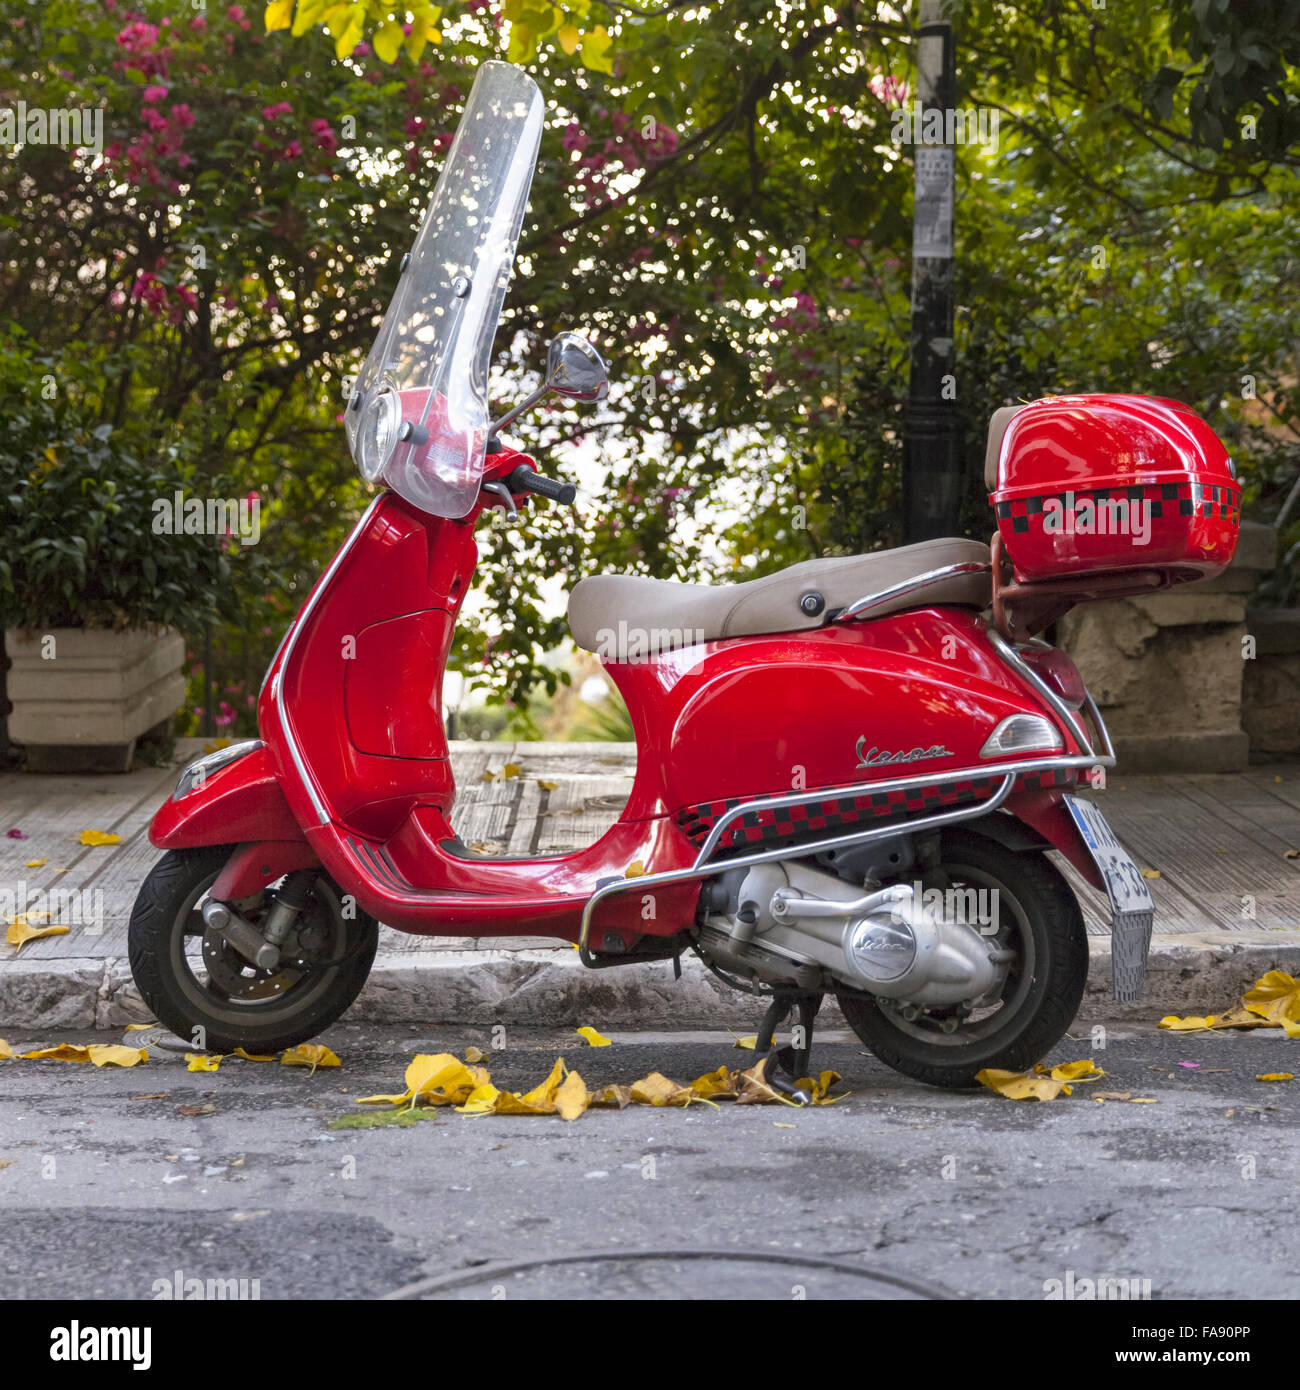 Red Piaggio Vespa scooter parked in a quiet road in the Kolonaki area of Athens, Greece Stock Photo